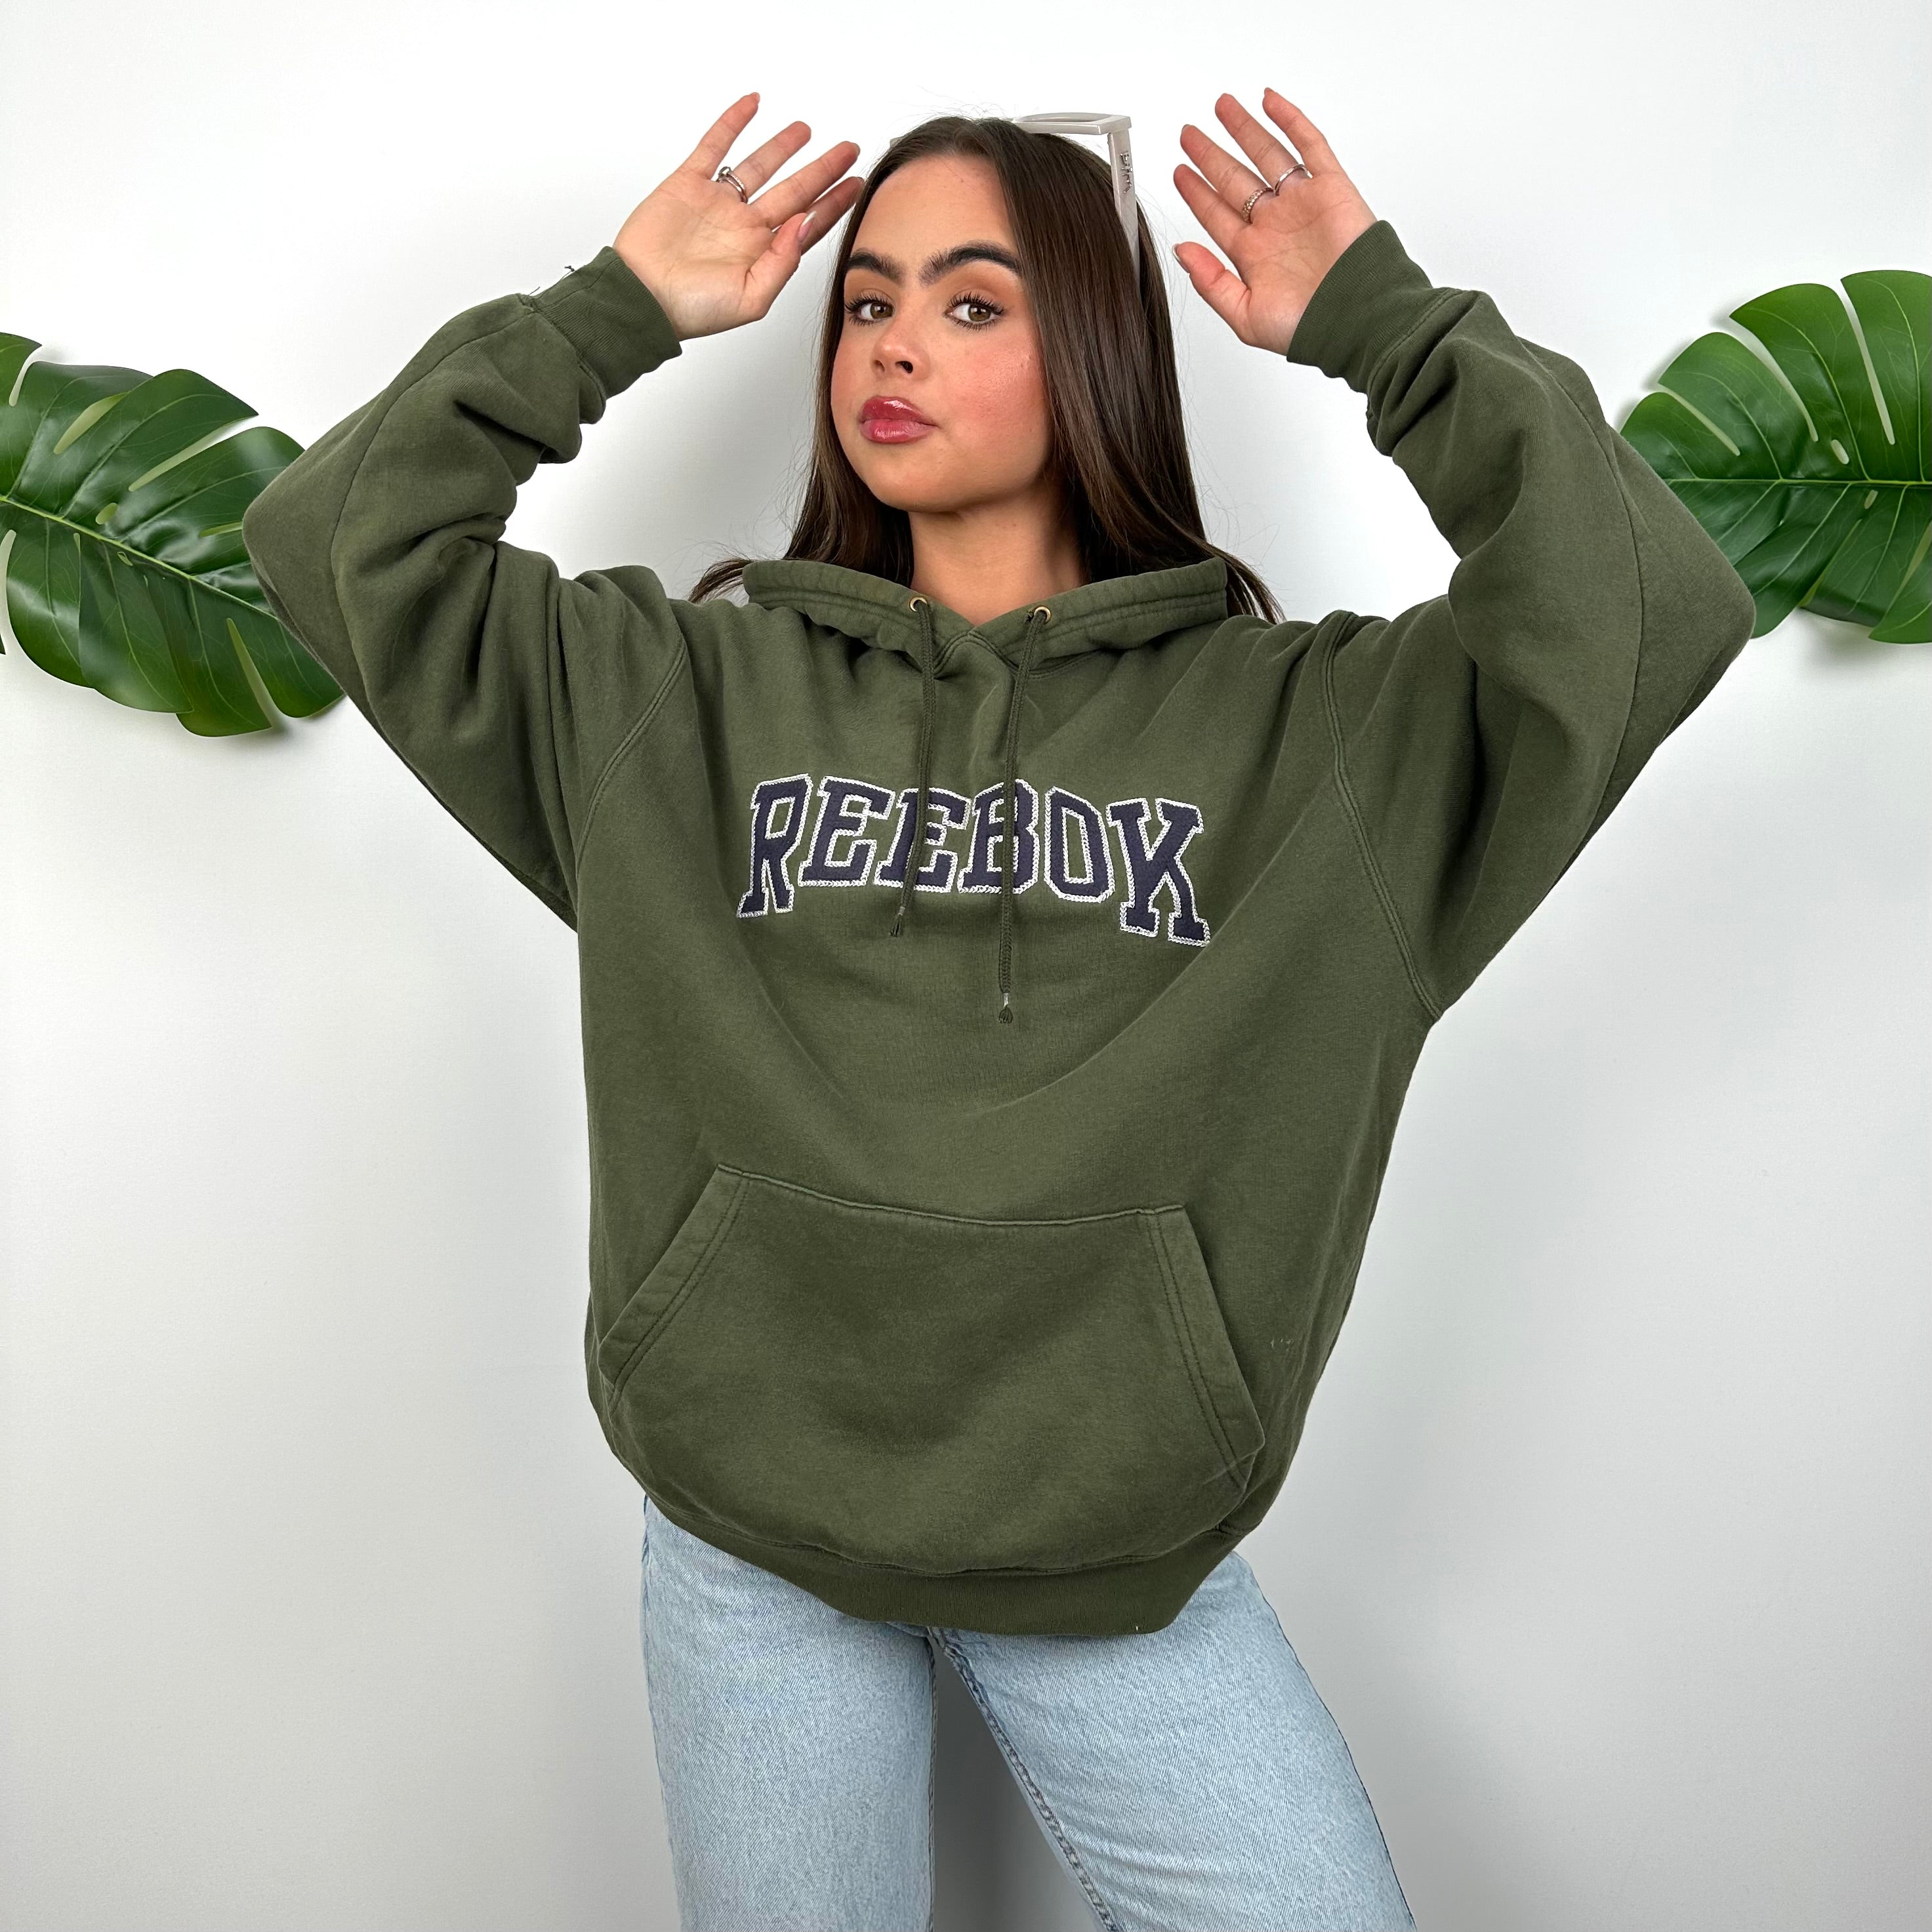 Reebok Green Embroidered Spell Out Hoodie (M)